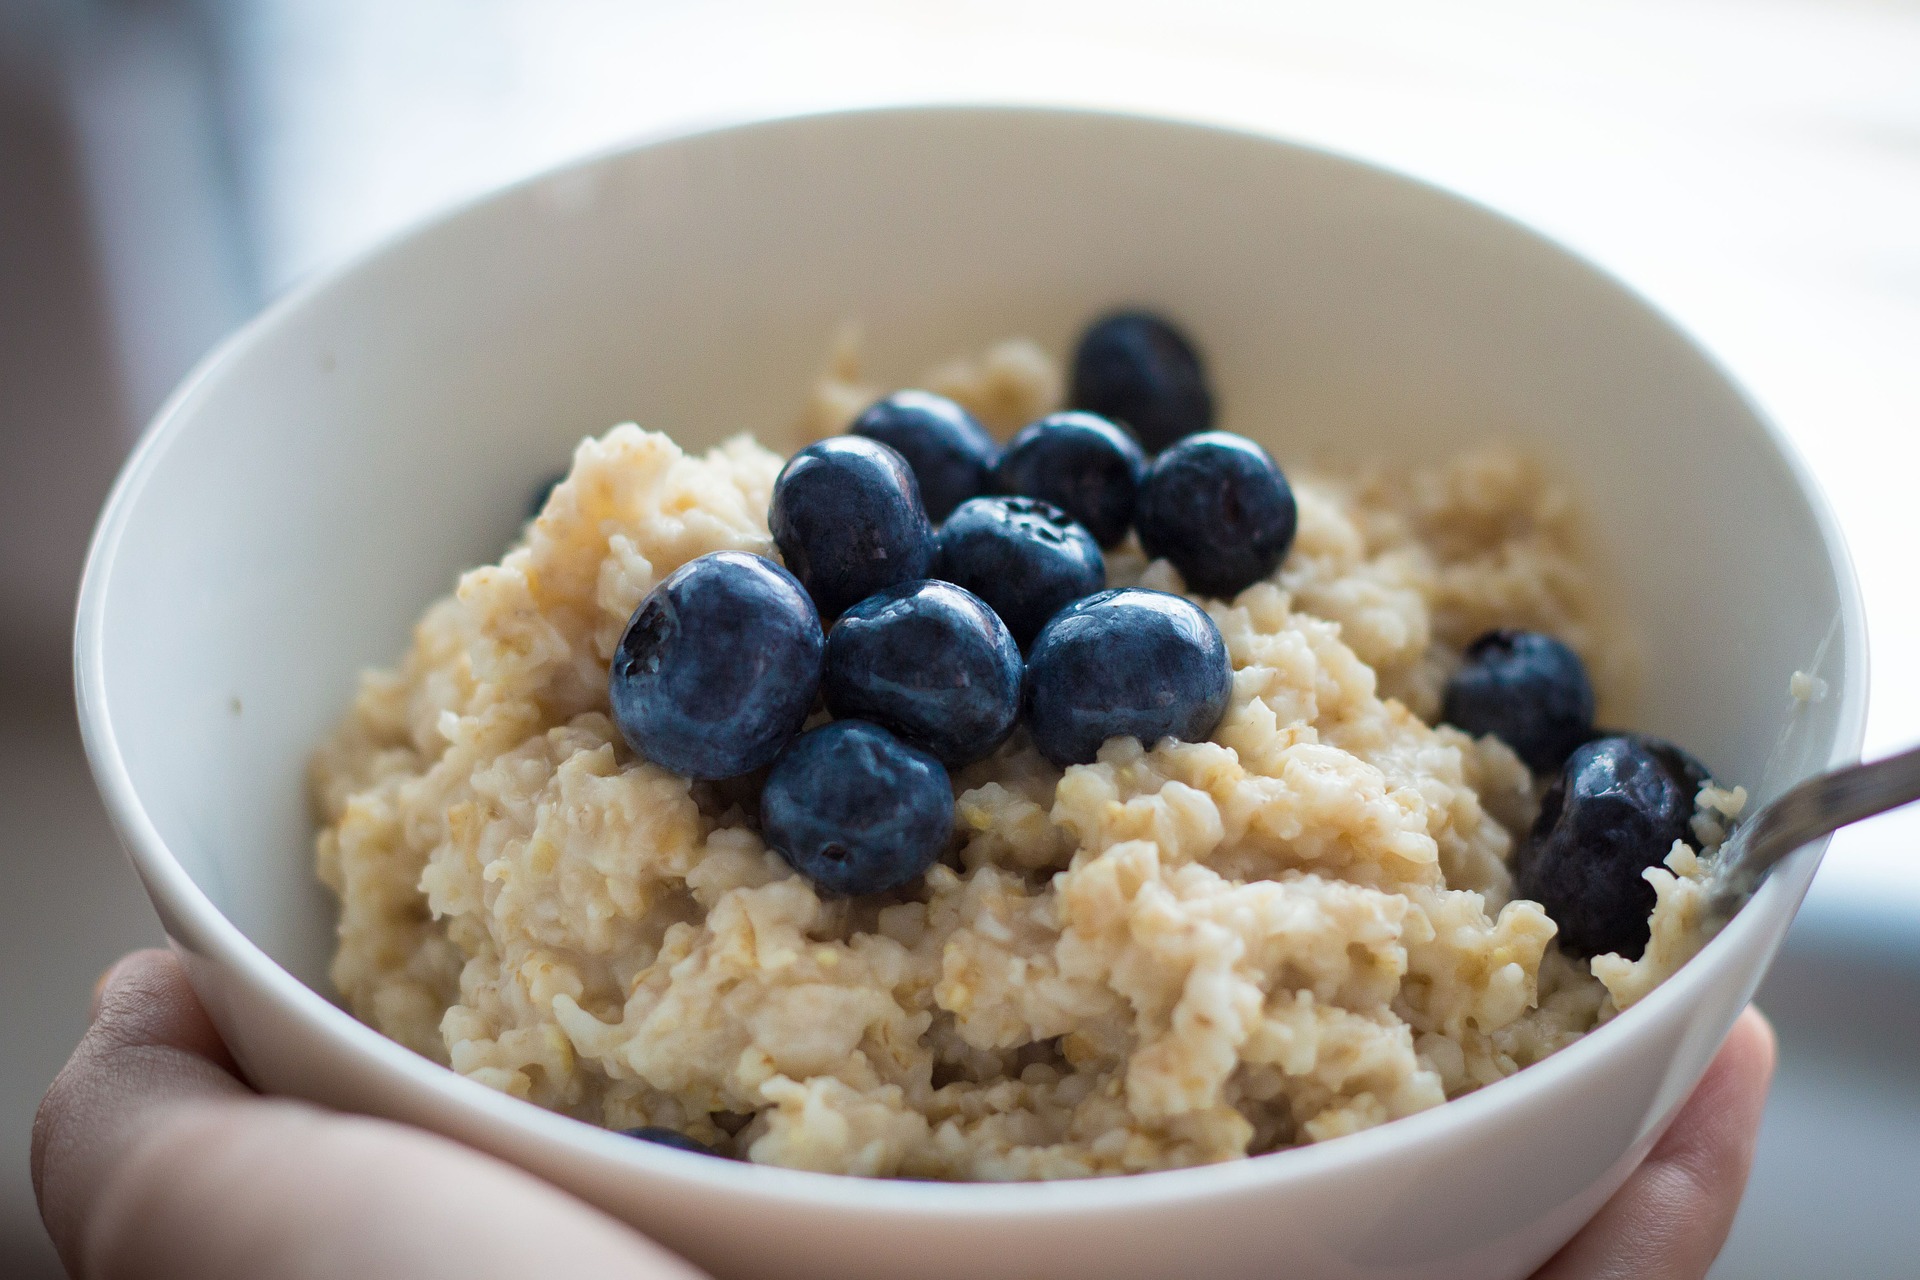 Oatmeal in a white bowl with blueberries on top